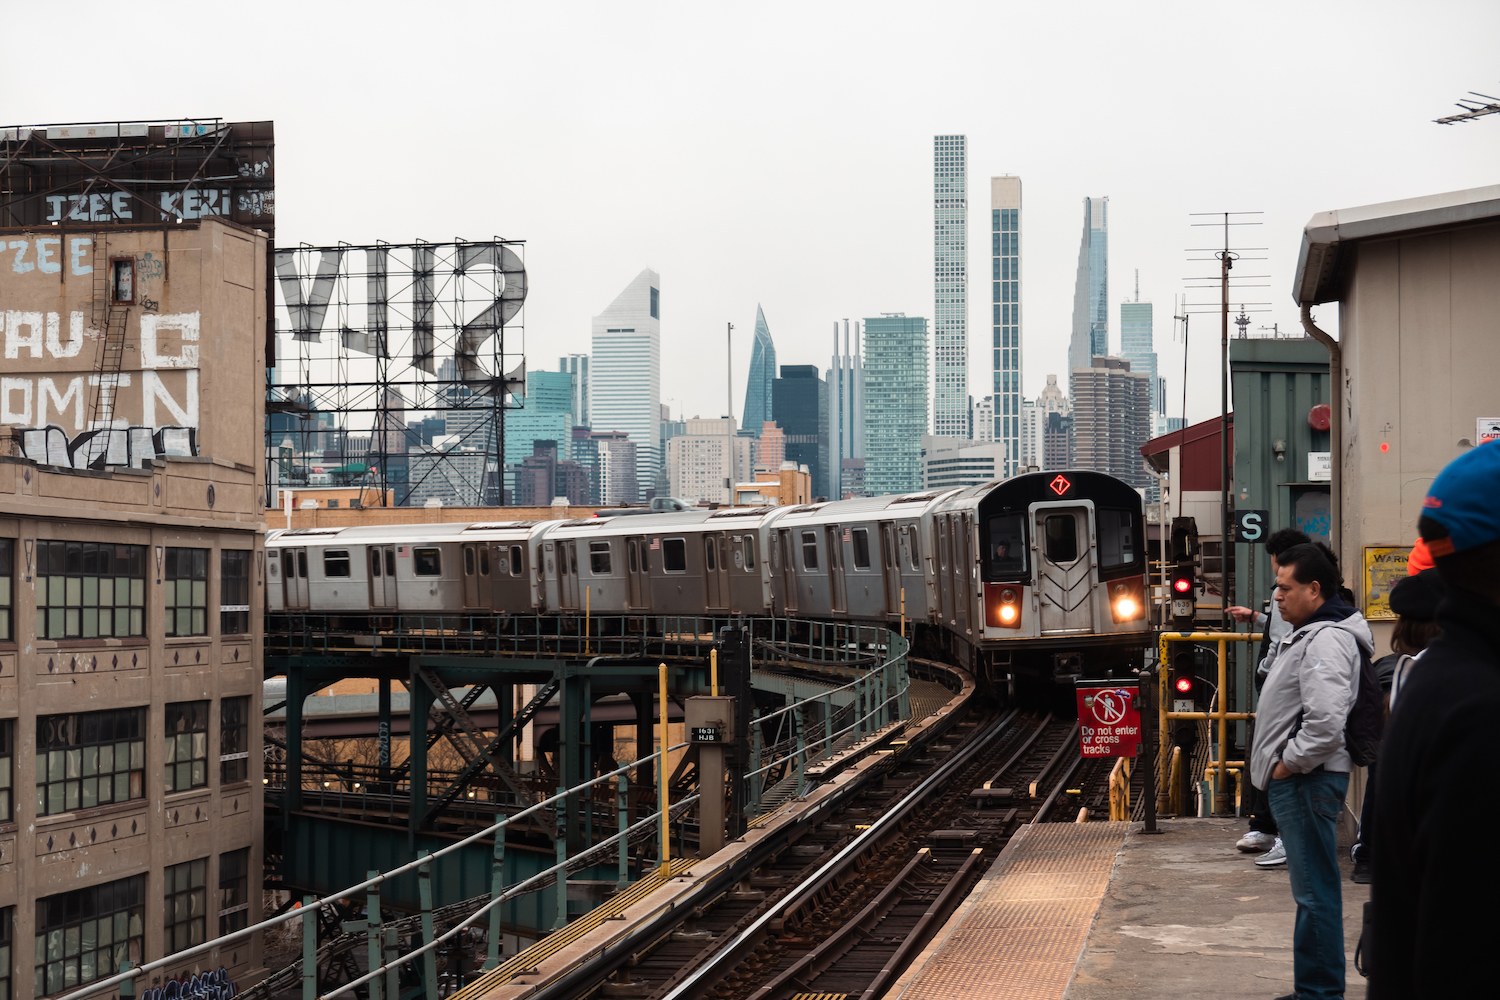 The 7 train arrives at the outdoor platform with the midtown Manhattan skyline in the background. There are people waiting on the platform.